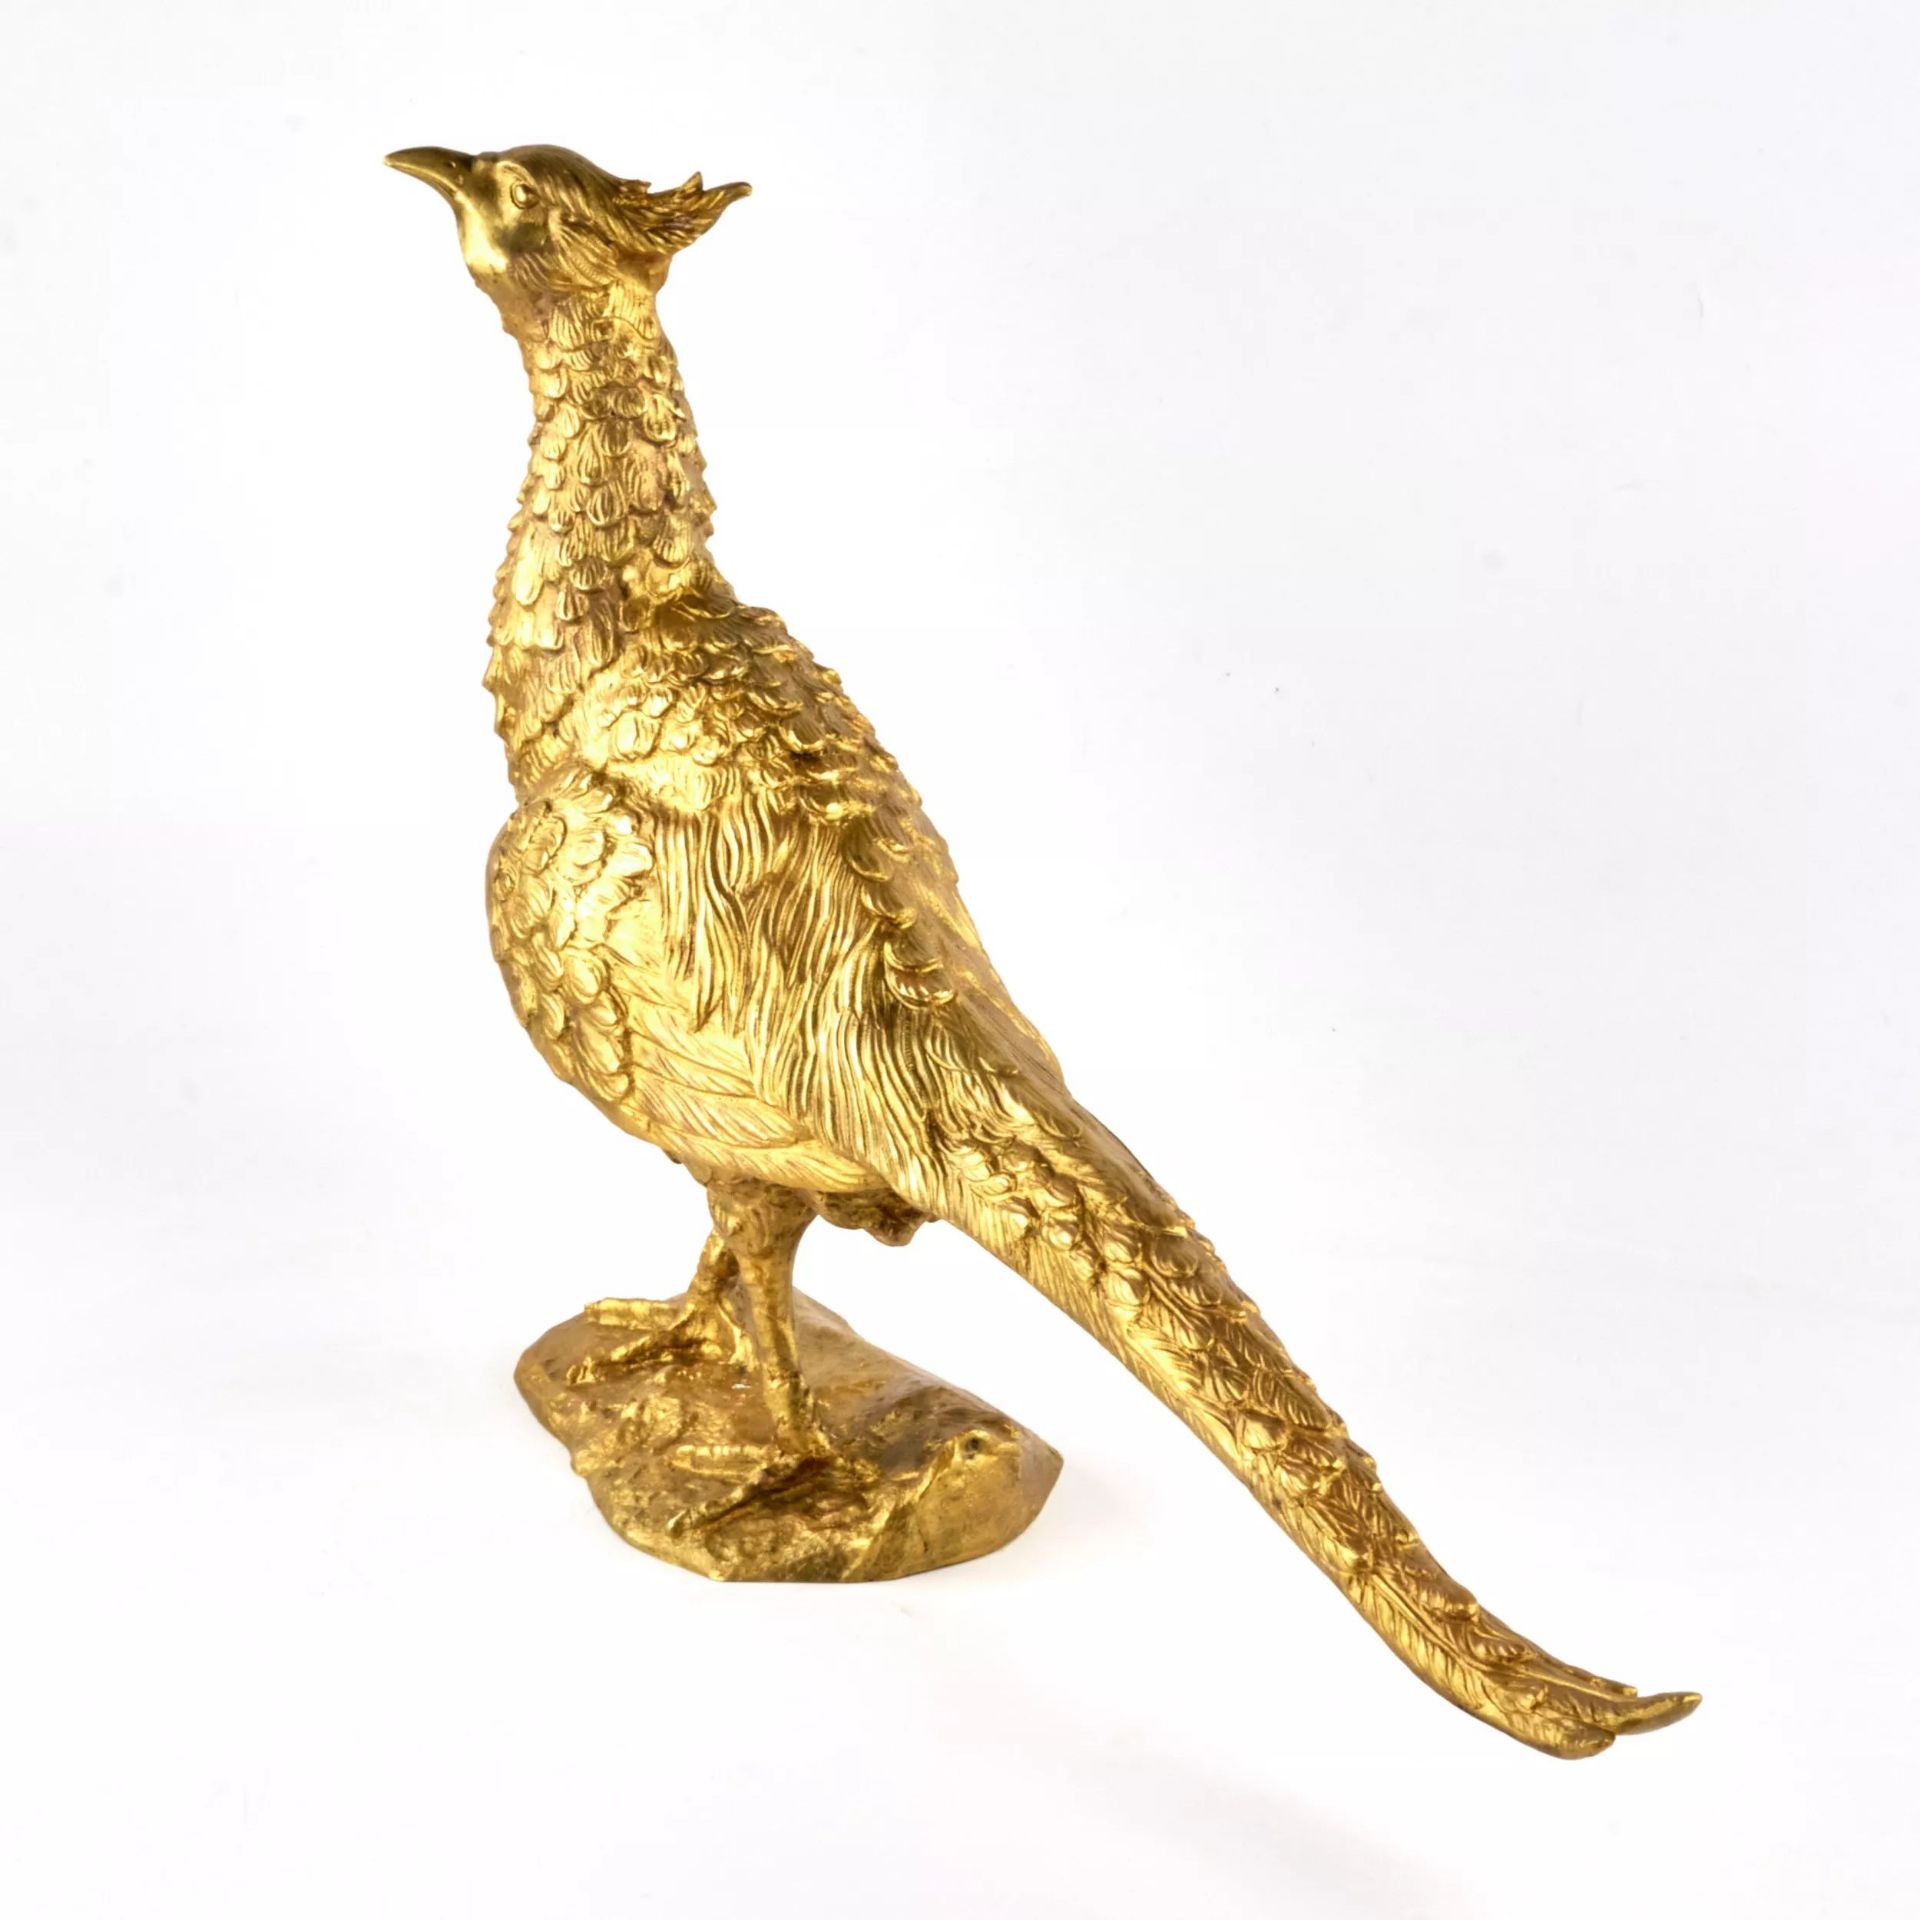 Pheasant of gilded bronze. - Image 2 of 7